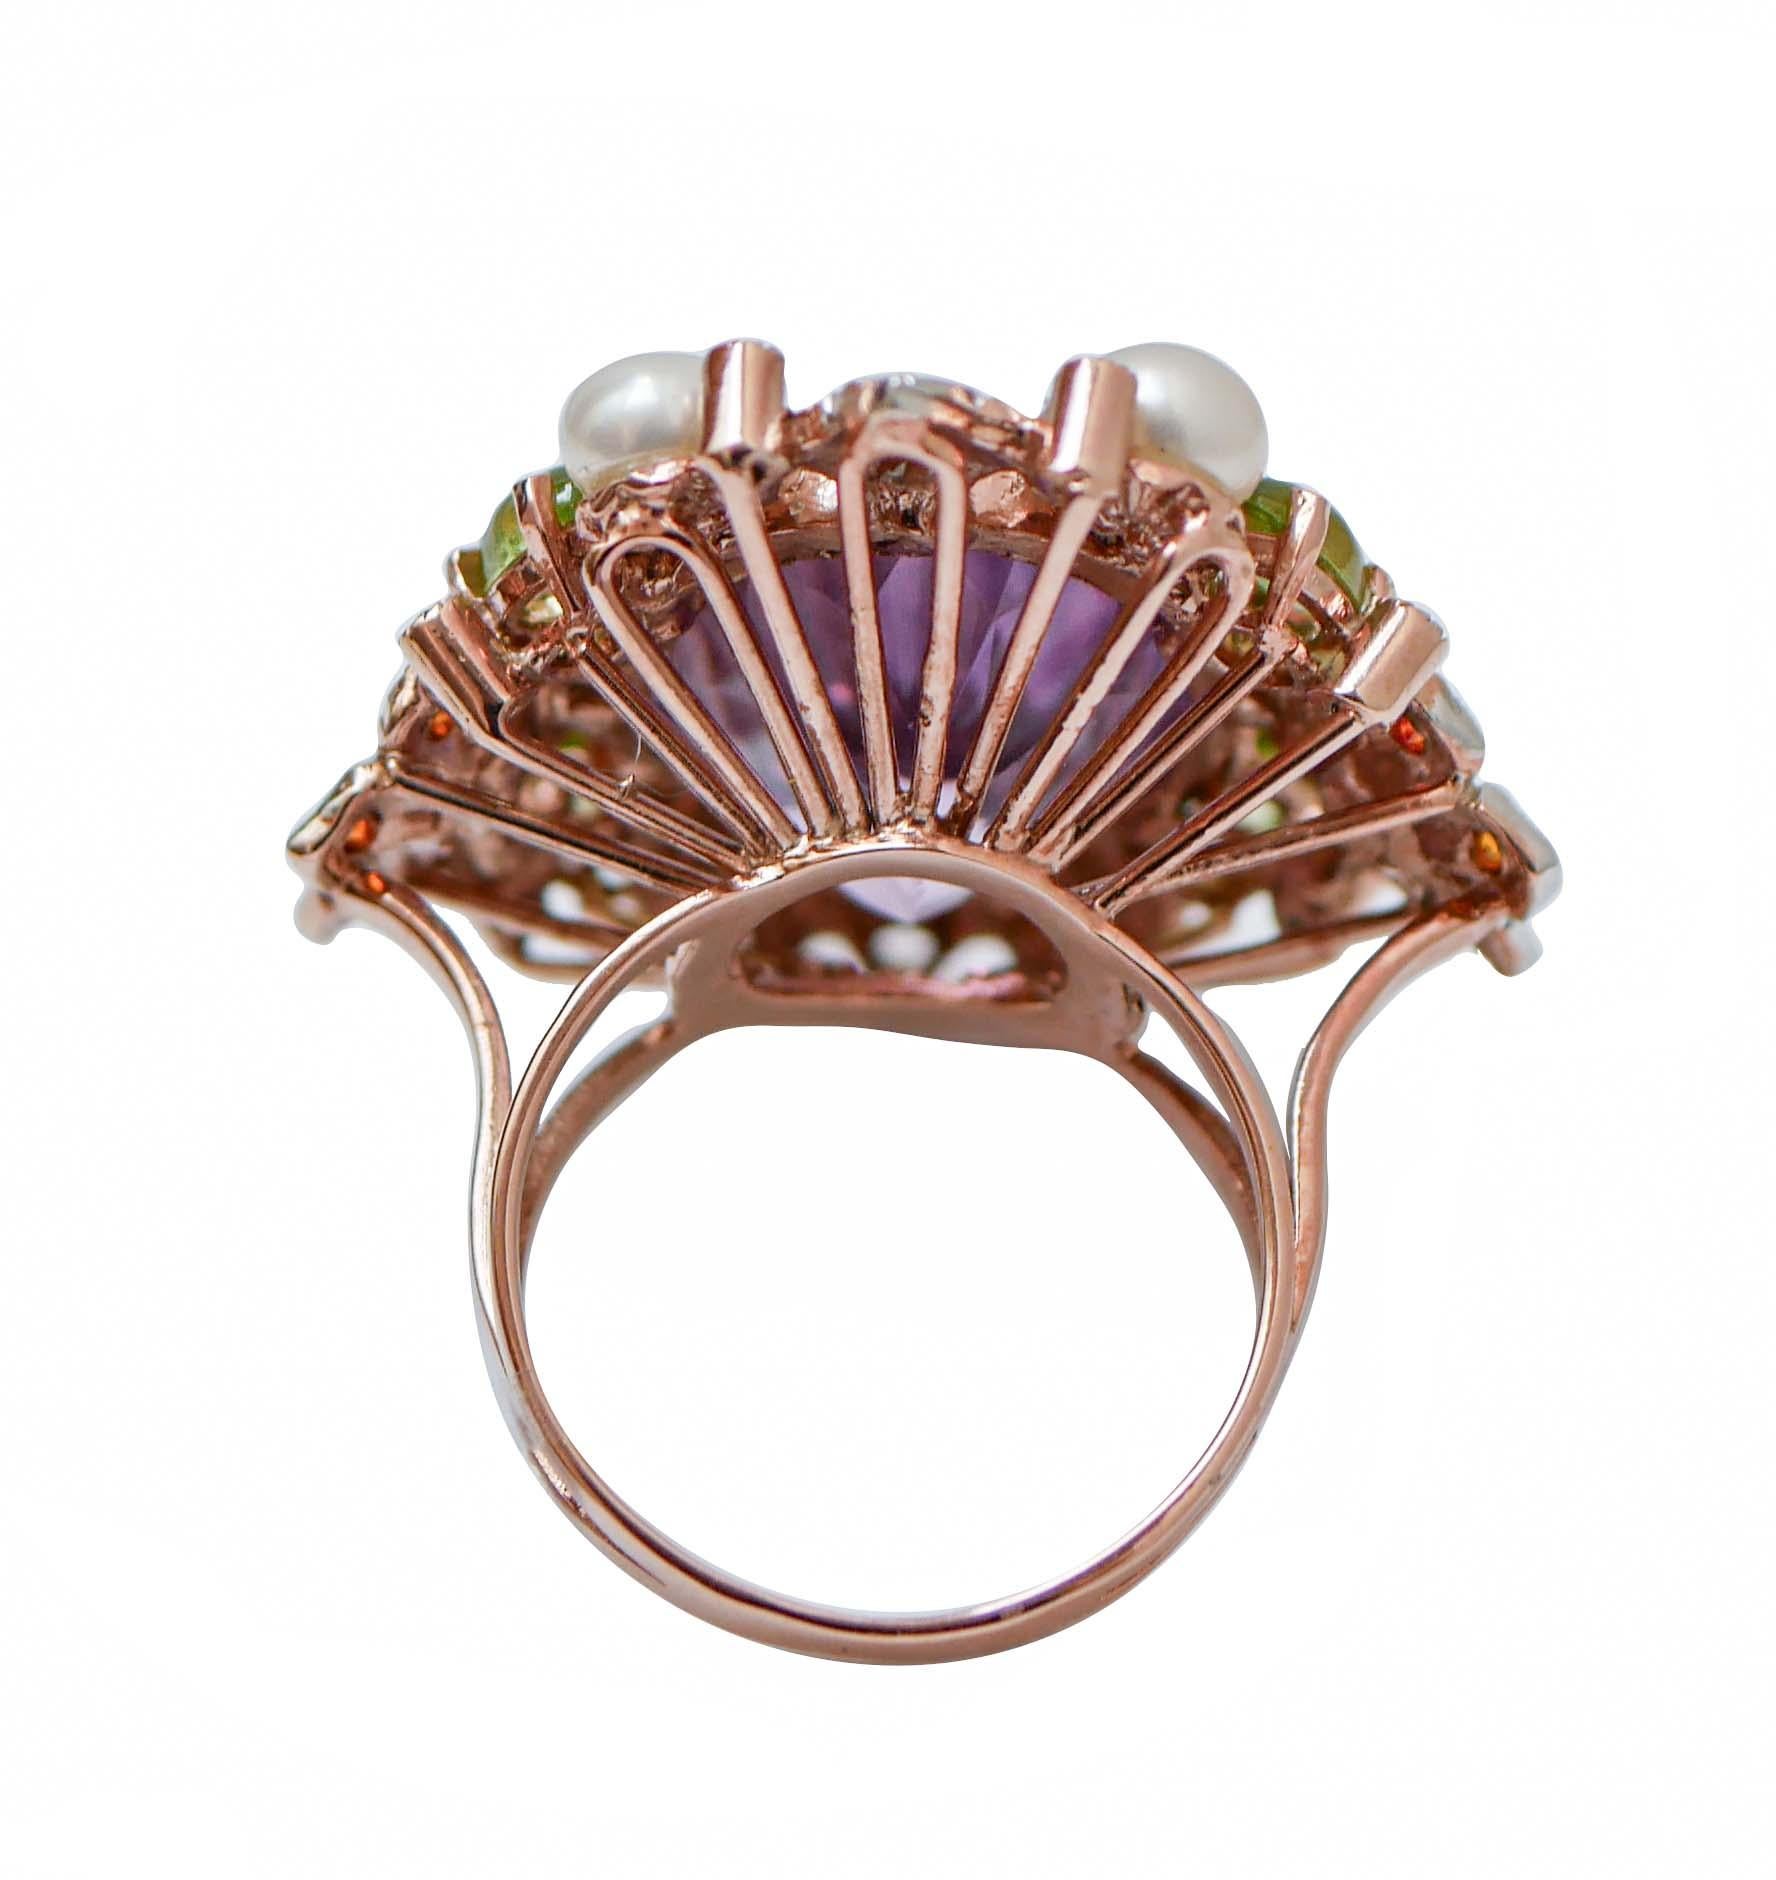 Retro Amethyst, Peridots, Pearls, Stones,  Diamonds, Rose Gold and Silver  Ring. For Sale